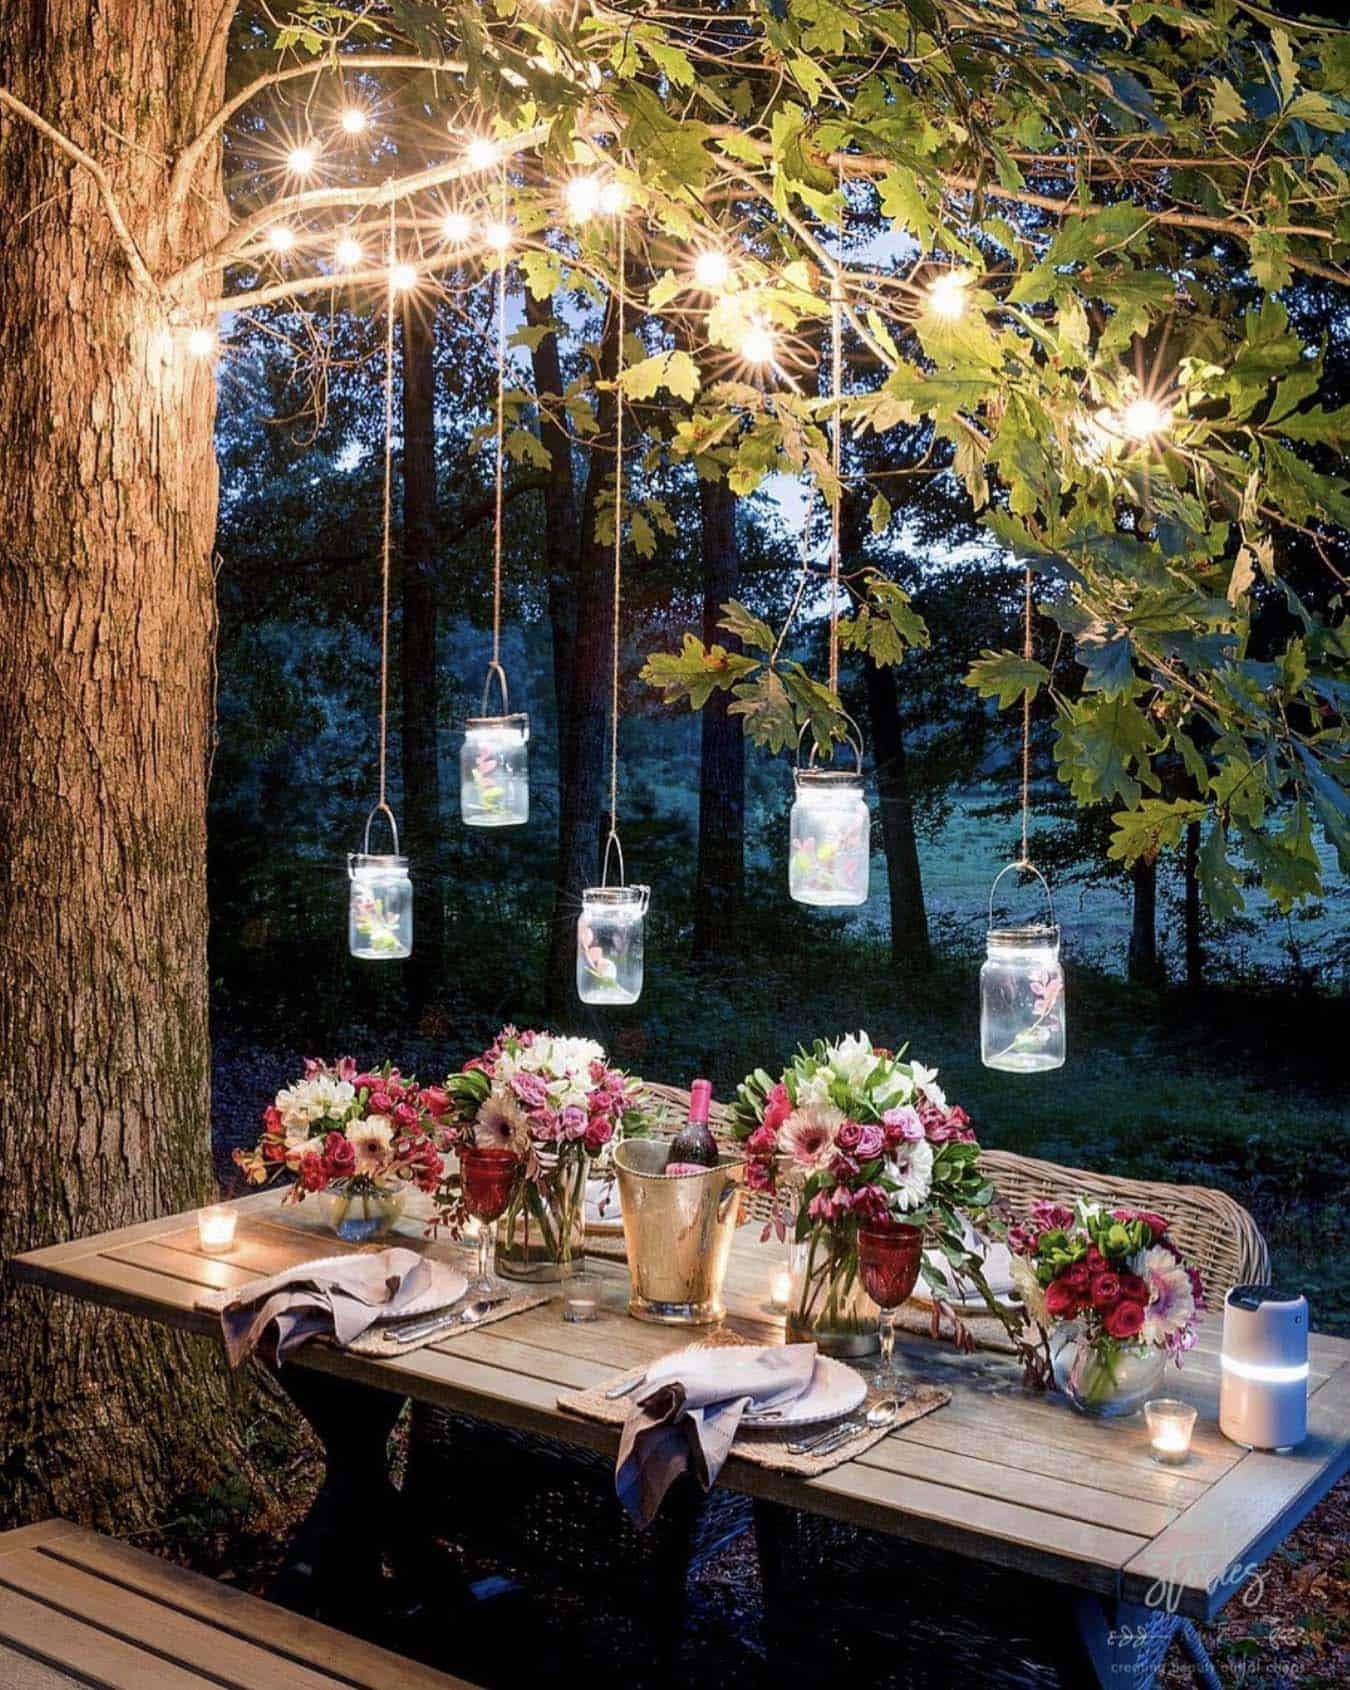 dreamy outdoor dining in a forest setting with hanging lights